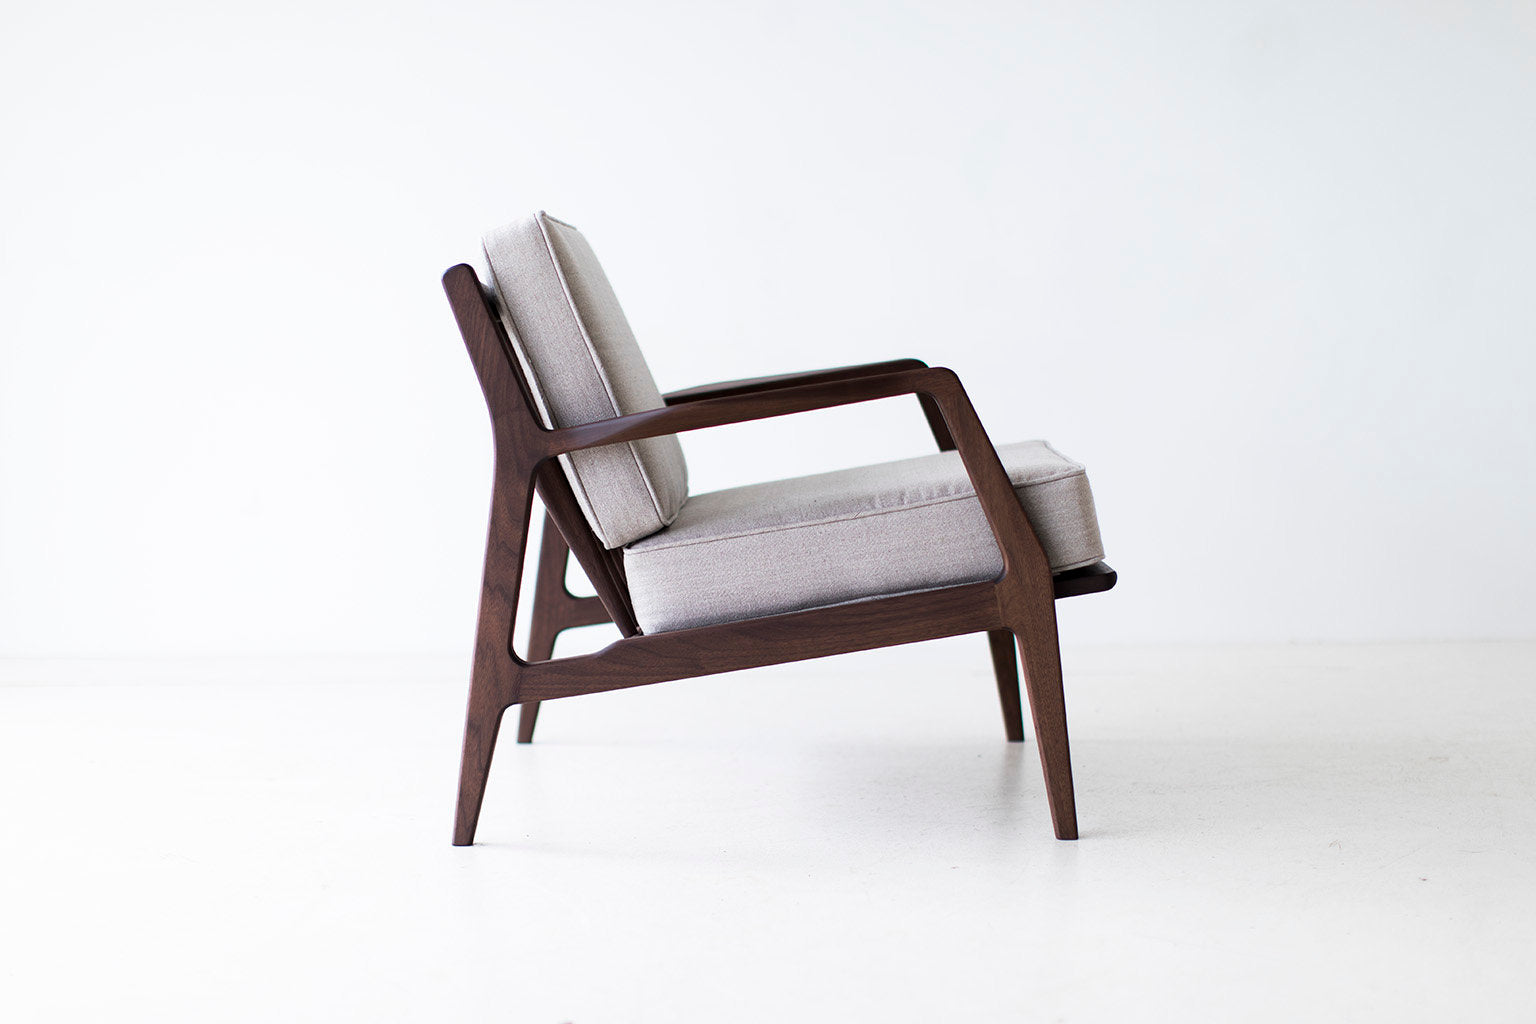 lawrence-peabody-lounge-chair-06